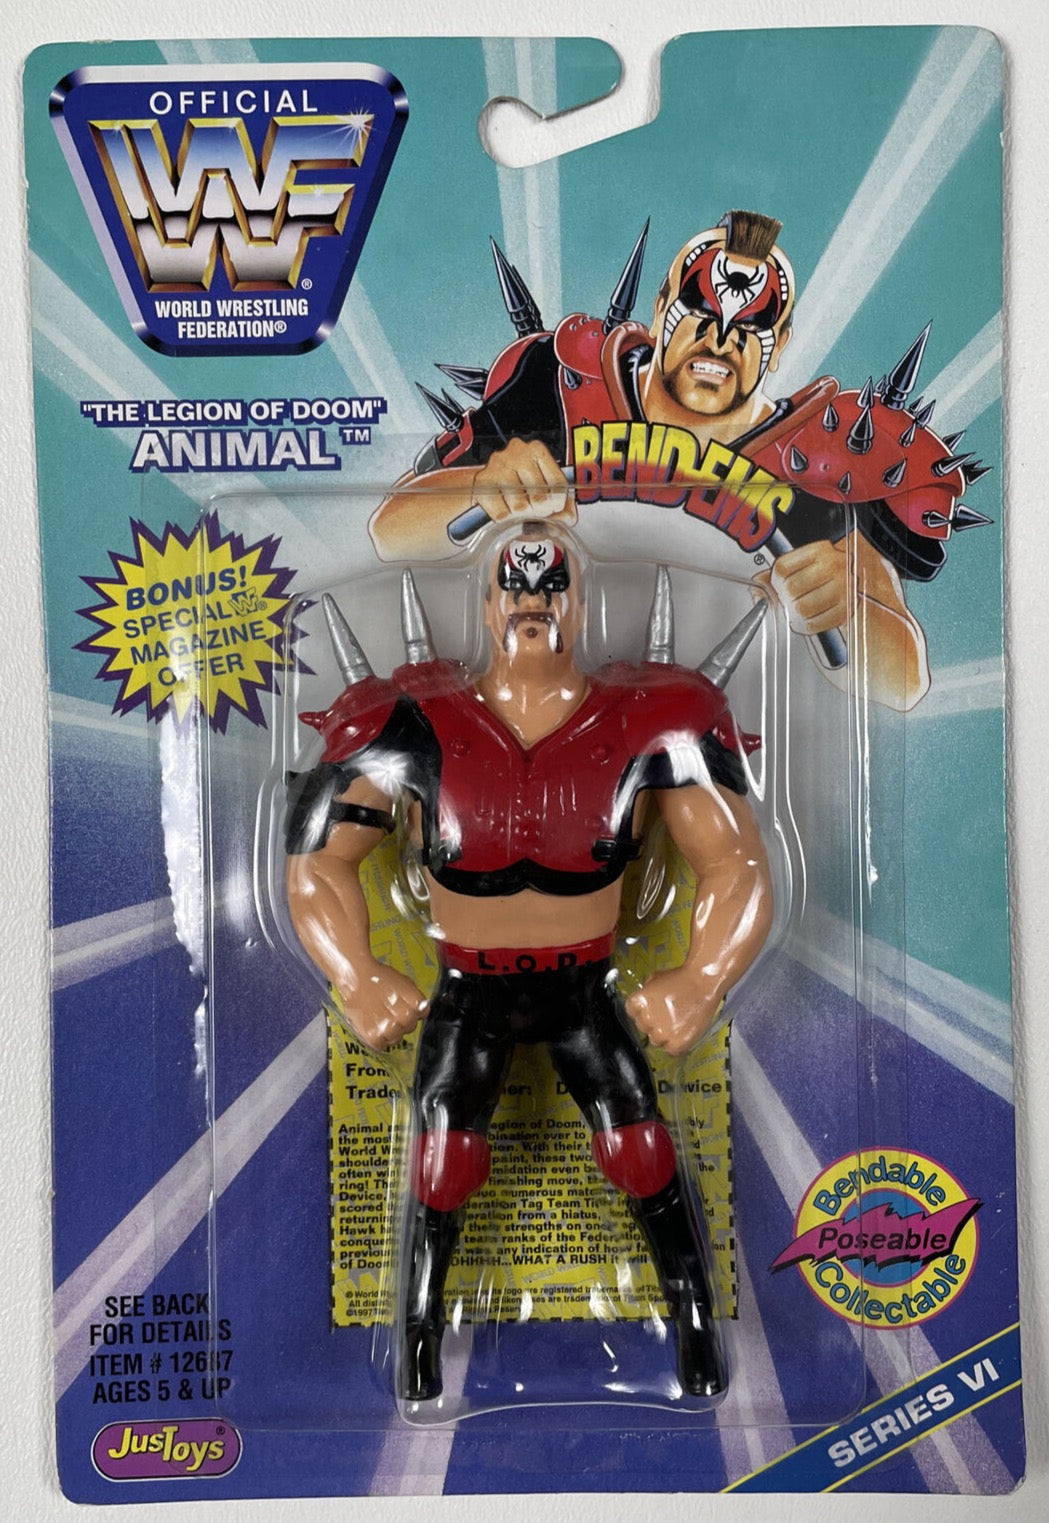 1997 WWF Just Toys Bend-Ems Series 6 "The Legion of Doom" Animal